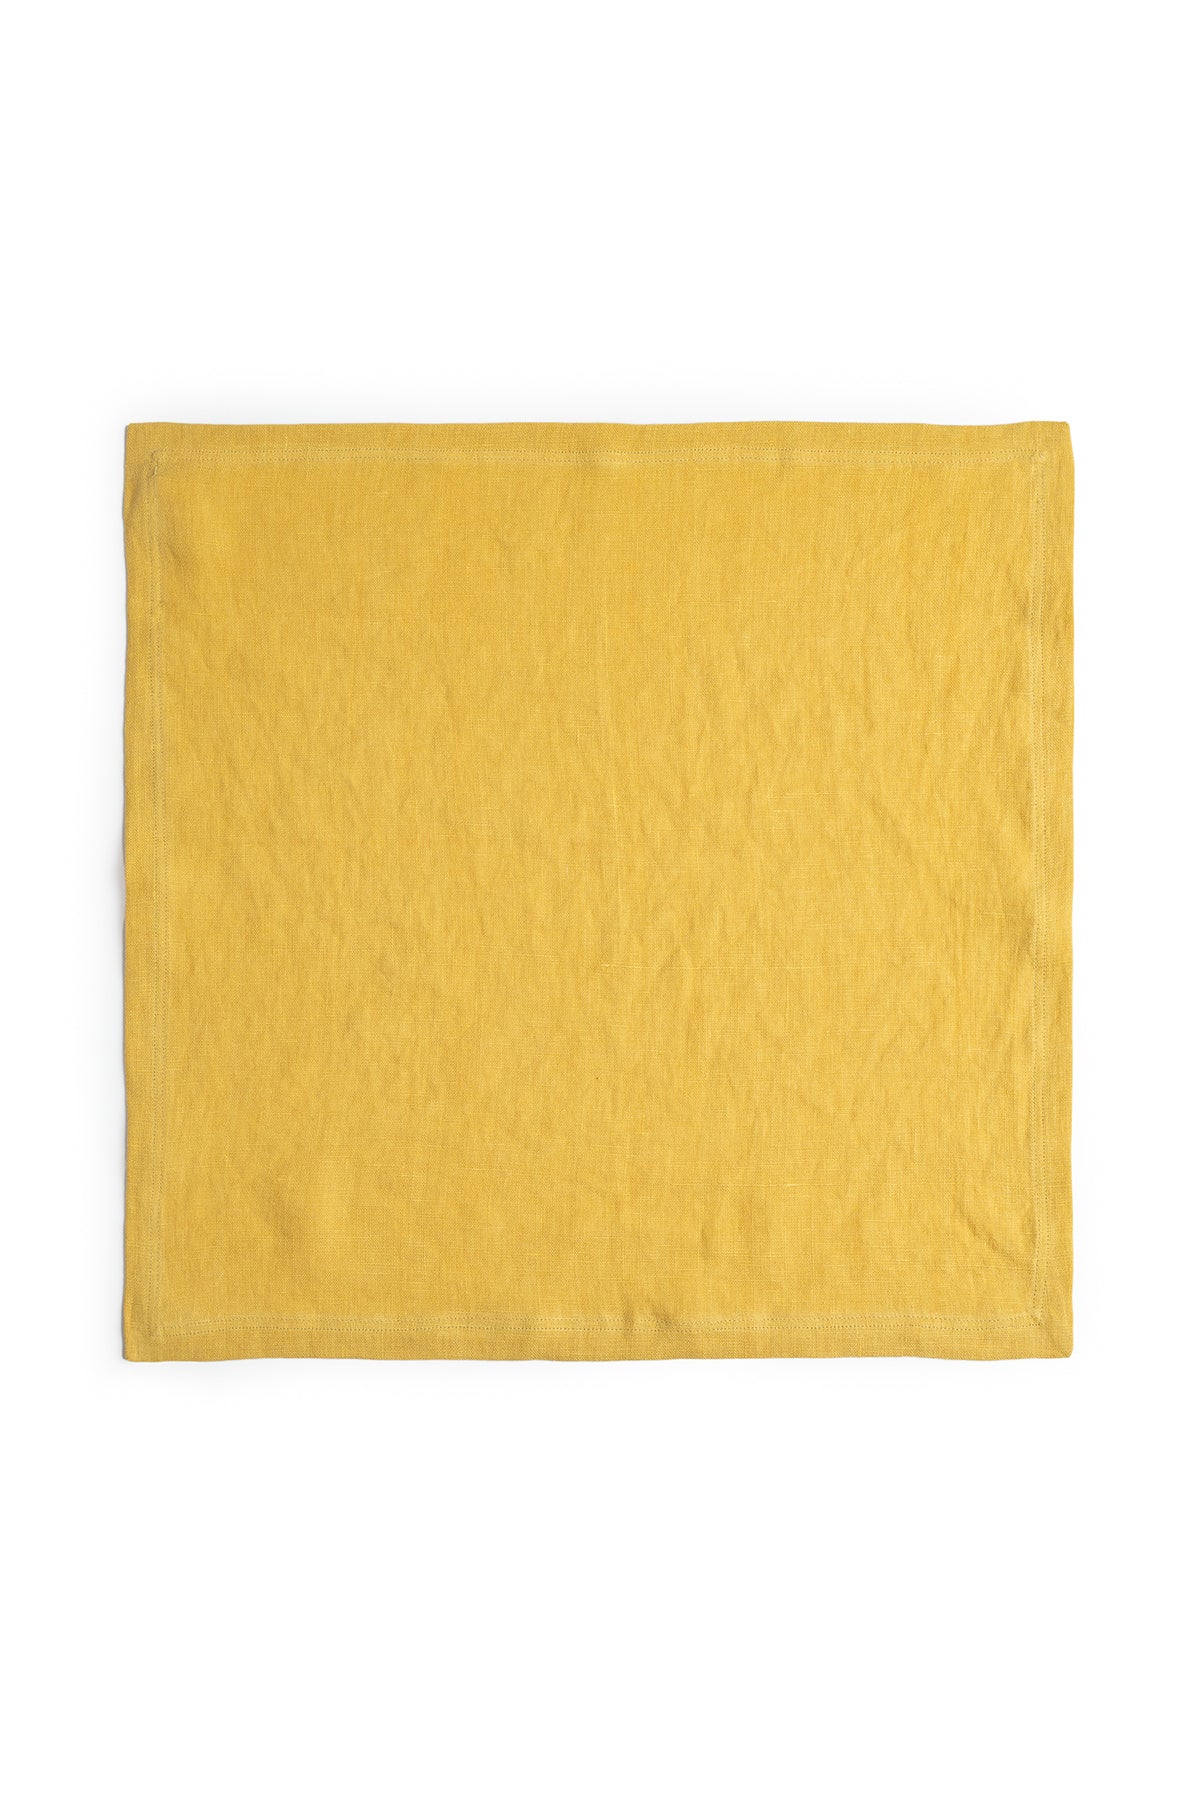 Yellow elegant LINEN NAPKIN isolated on a white background by Jenny Graham Home.-15073421099201